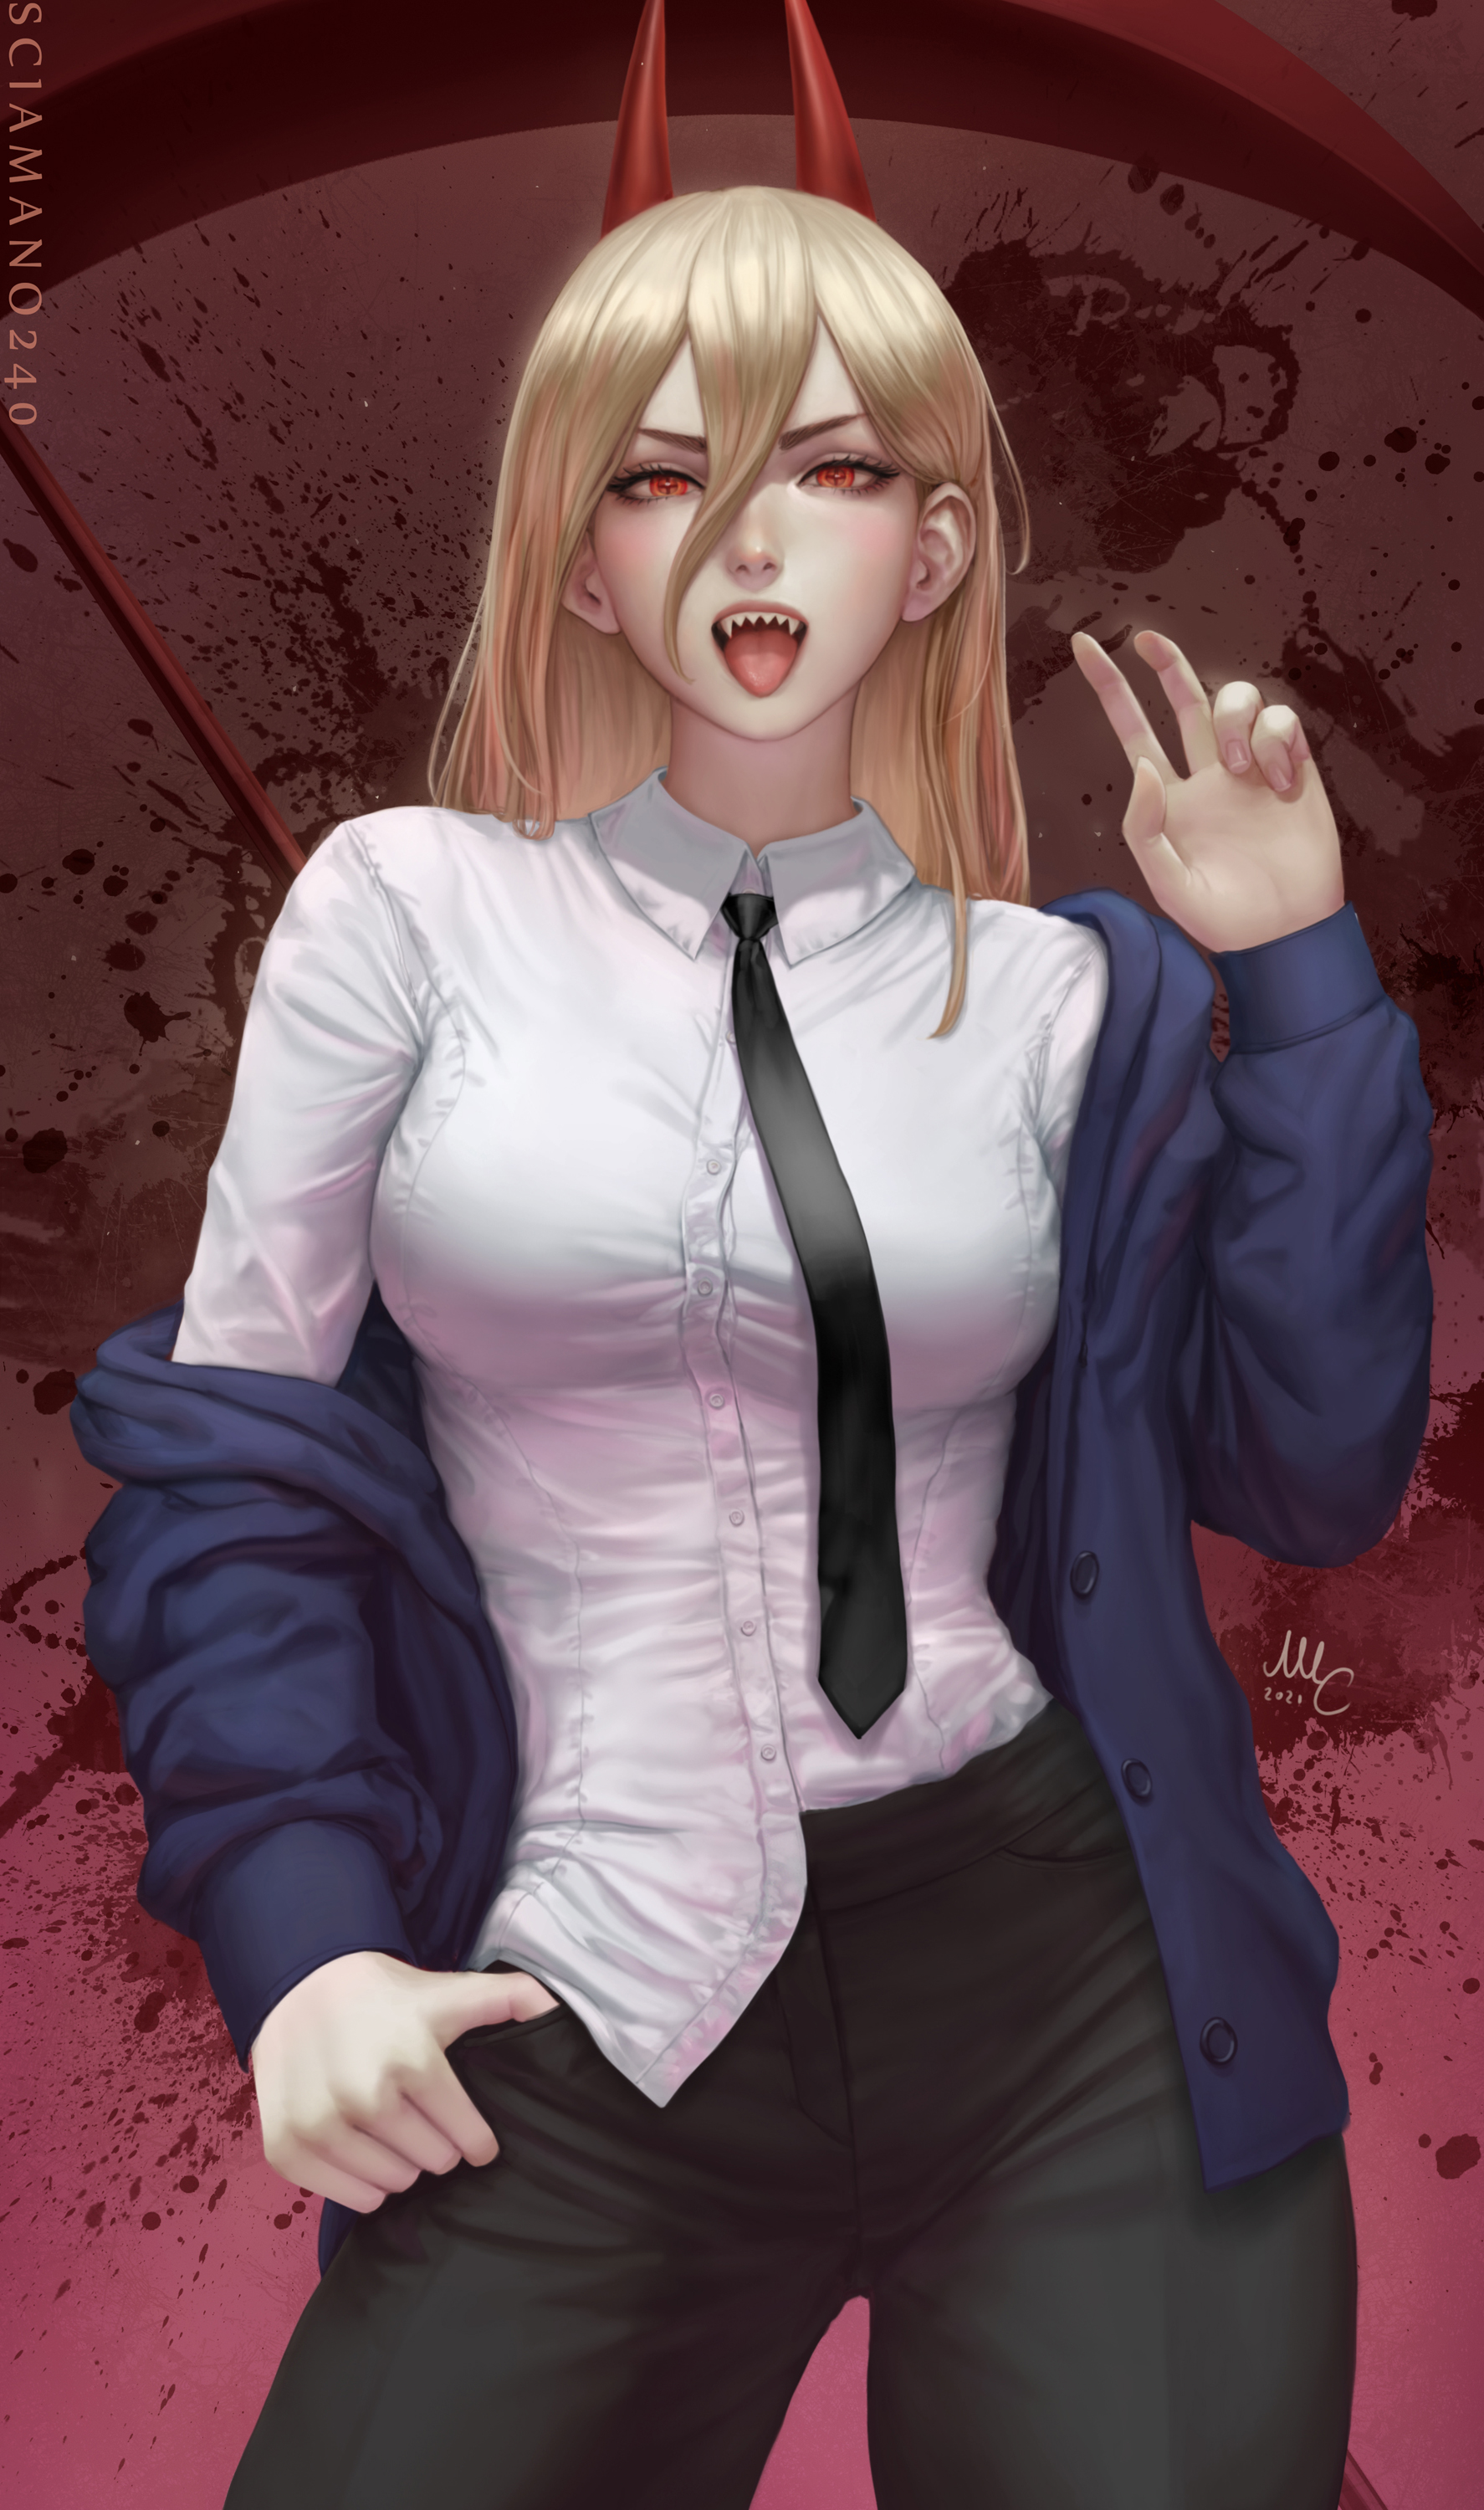 Anime 1774x3000 illustration artwork digital art fan art drawing fantasy art fantasy girl women Mirco Cabbia anime anime girls Chainsaw Man Power (Chainsaw Man) long hair blonde horns open mouth looking at viewer tongue out shirt tie red eyes